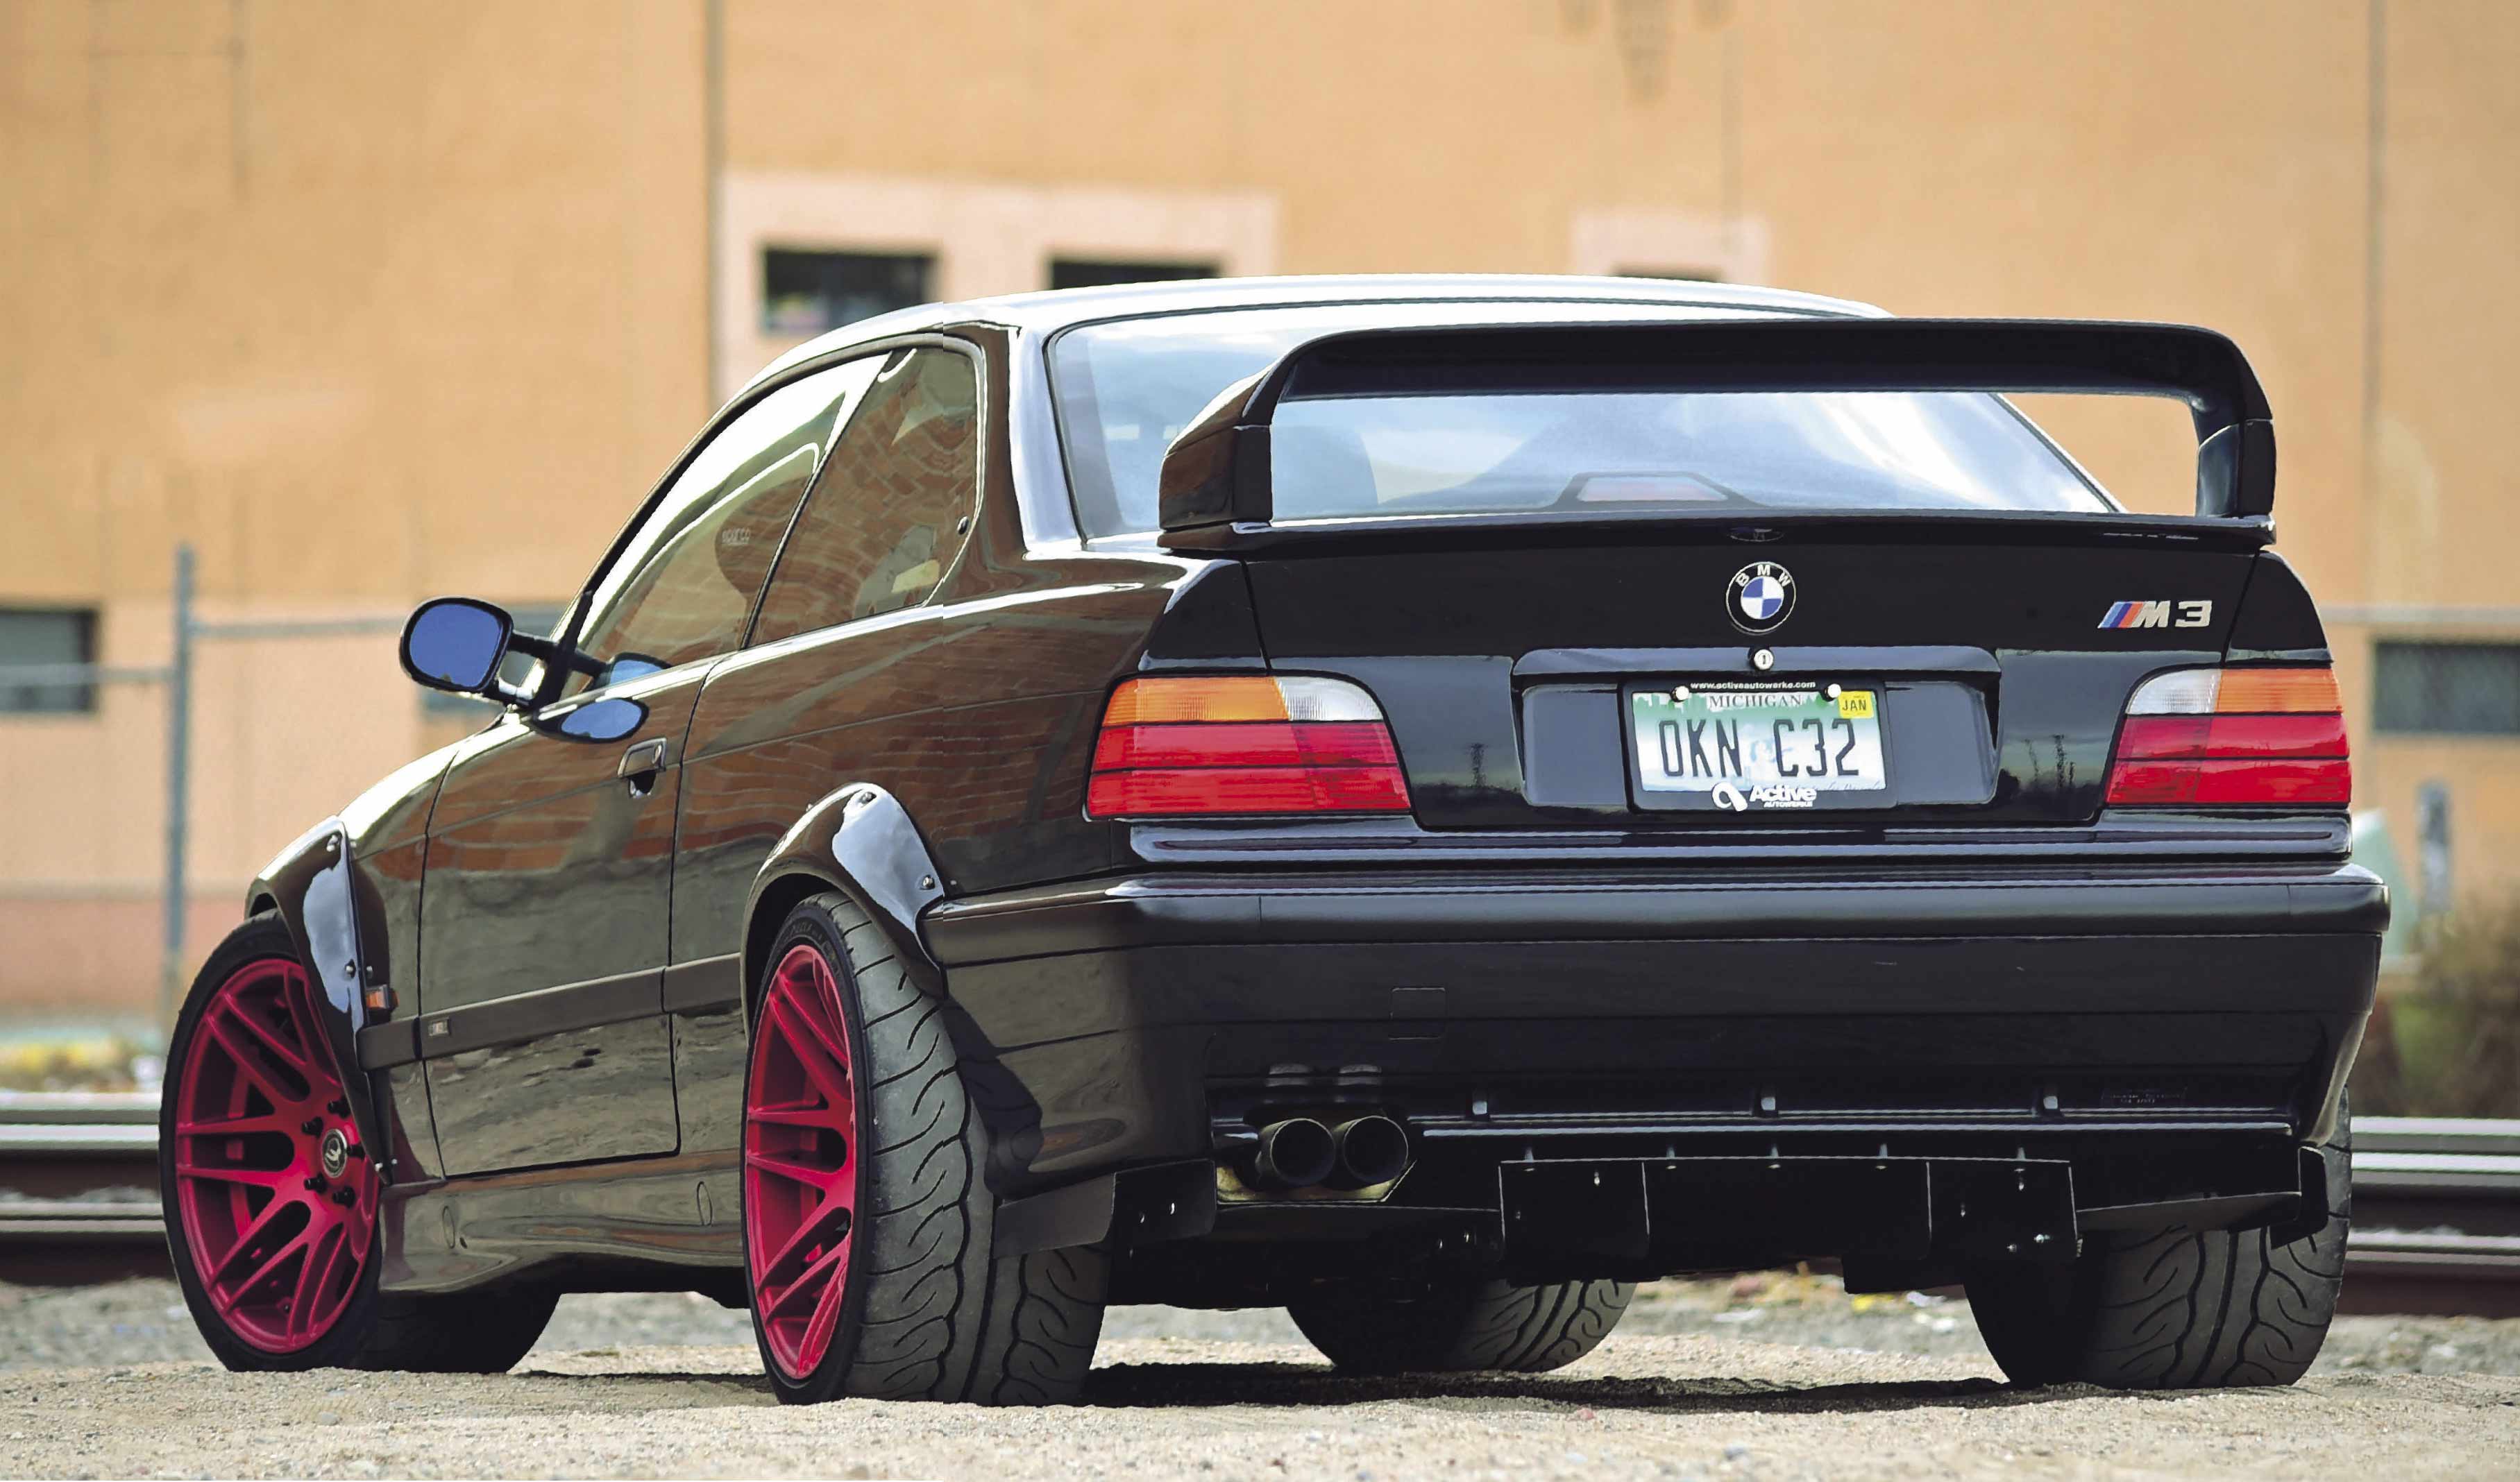 Supercharged 400hp S50-engined wide-arch BMW M3 Coupe E36 - Drive-My